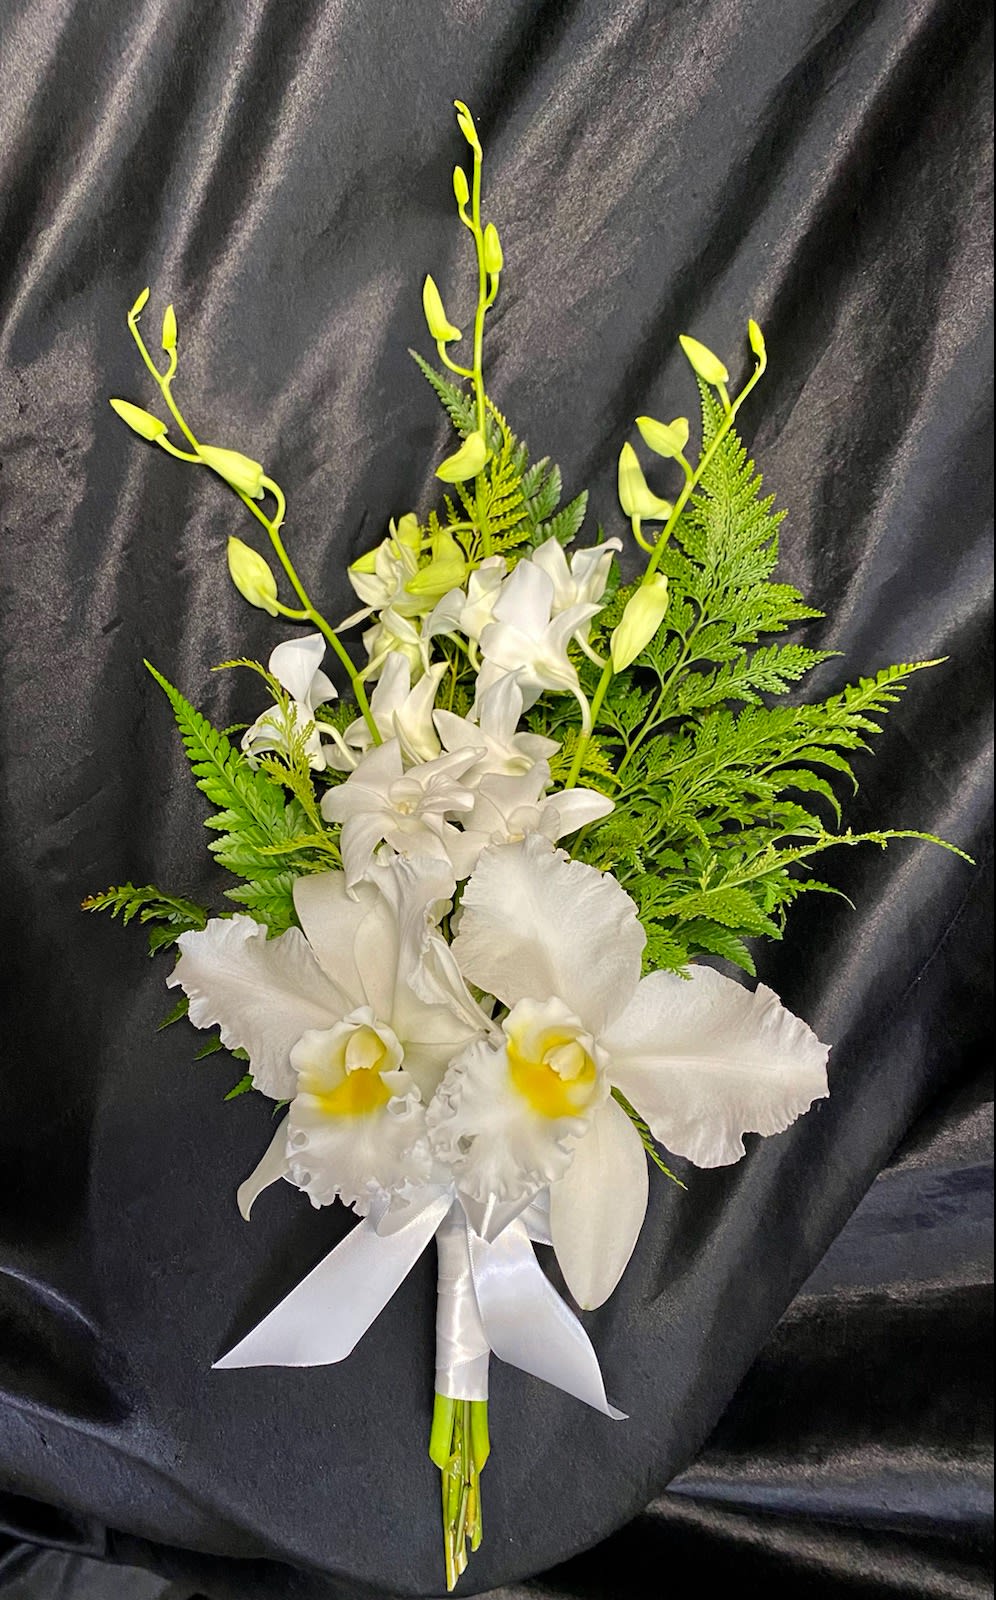 SIMPLE BRIDAL ORCHIDS - WHITE DENDROBIUM &amp; CATTELEYA OR CYMBIDIUM ORCHIDS, FOLIAGE